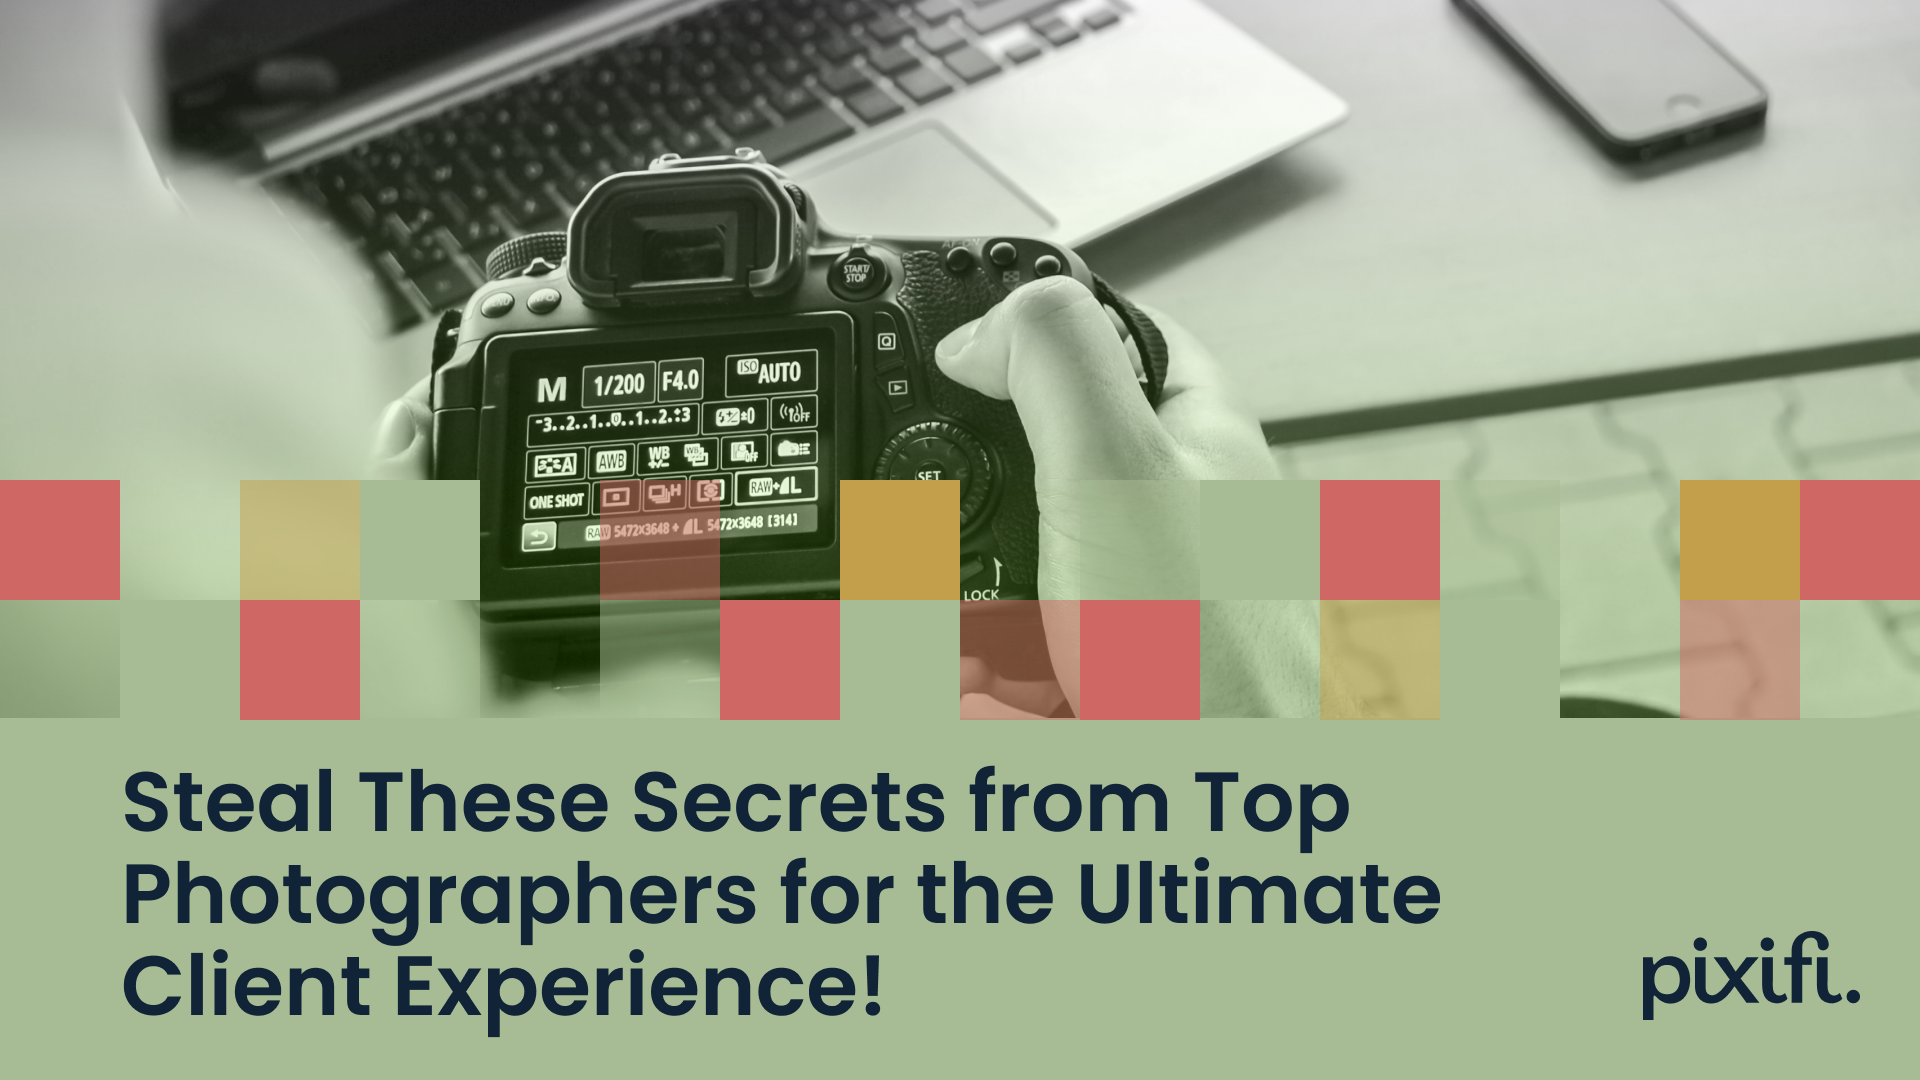 Steal These Secrets from Top Photographers for the Ultimate Client Experience!